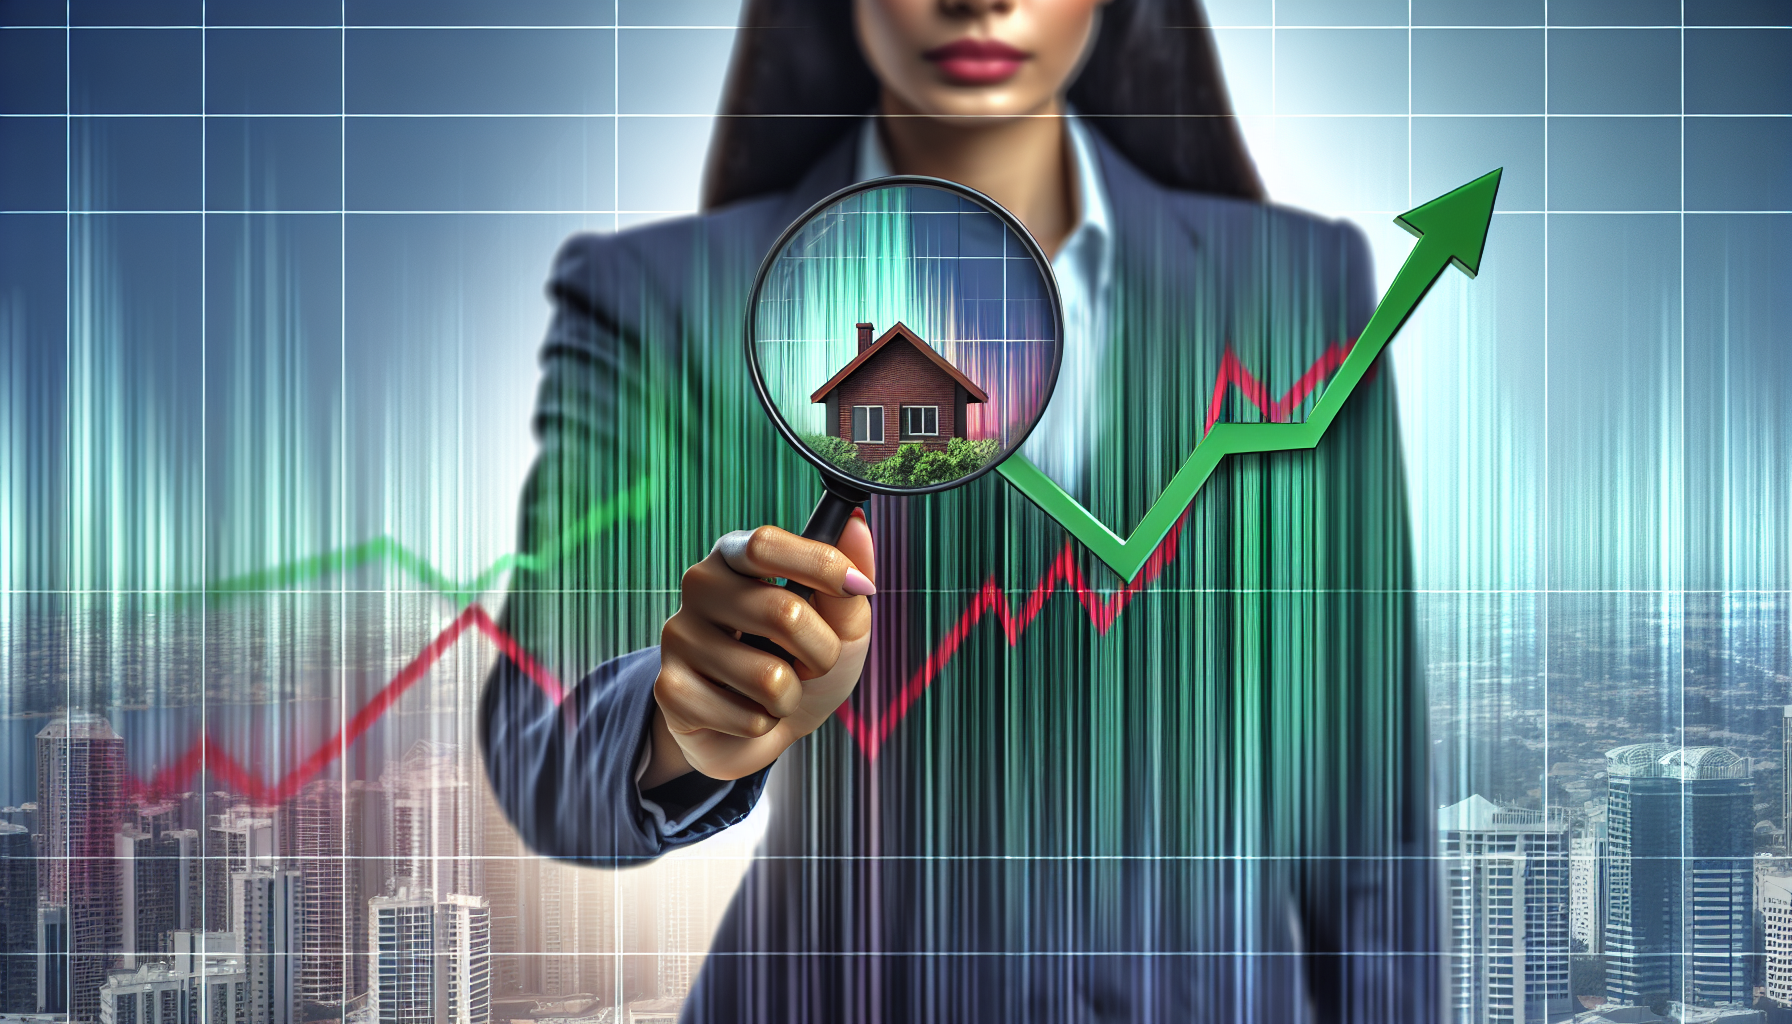 Understanding economic trends through the lens of new home construction and mortgage rates